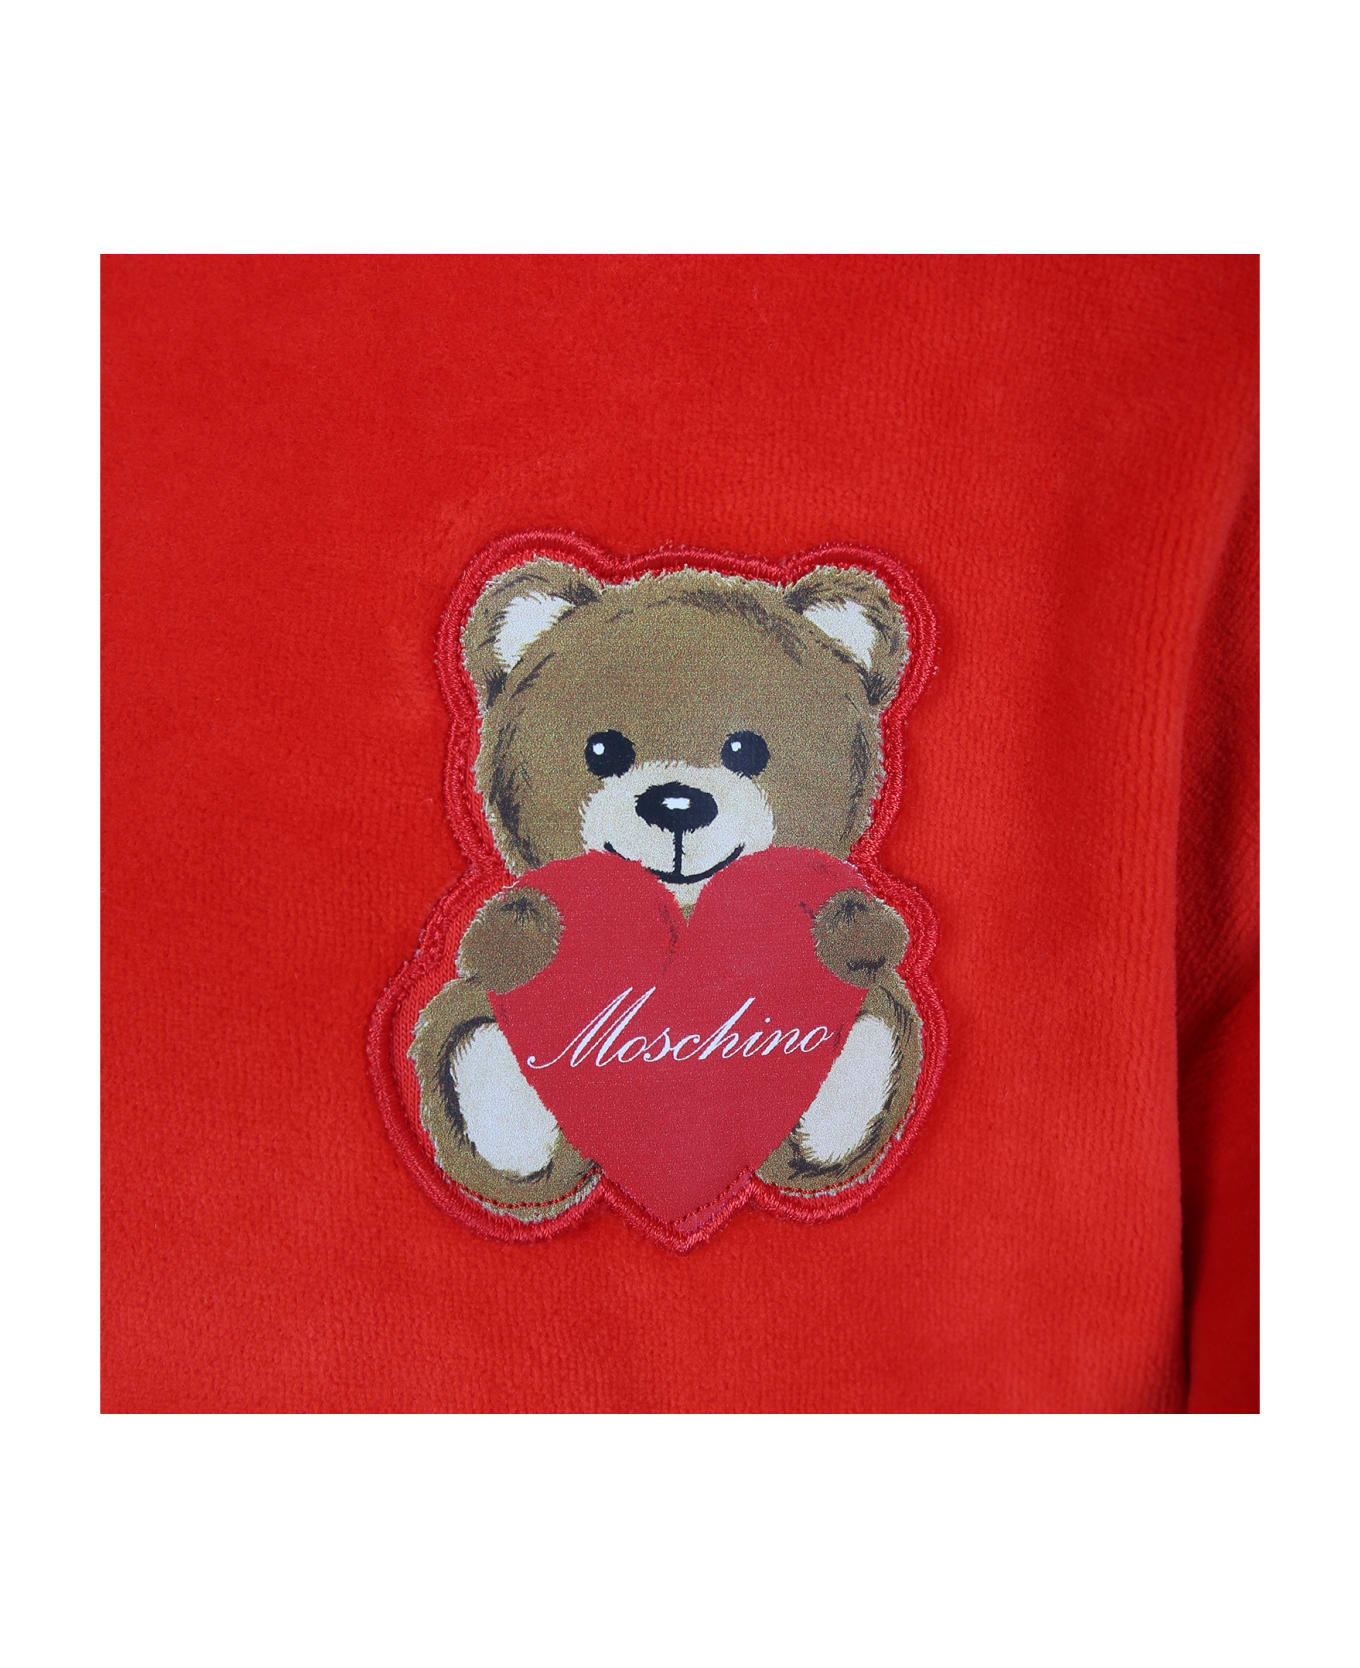 Moschino Red Suit For Girl With Teddy Bears And Logo - Red